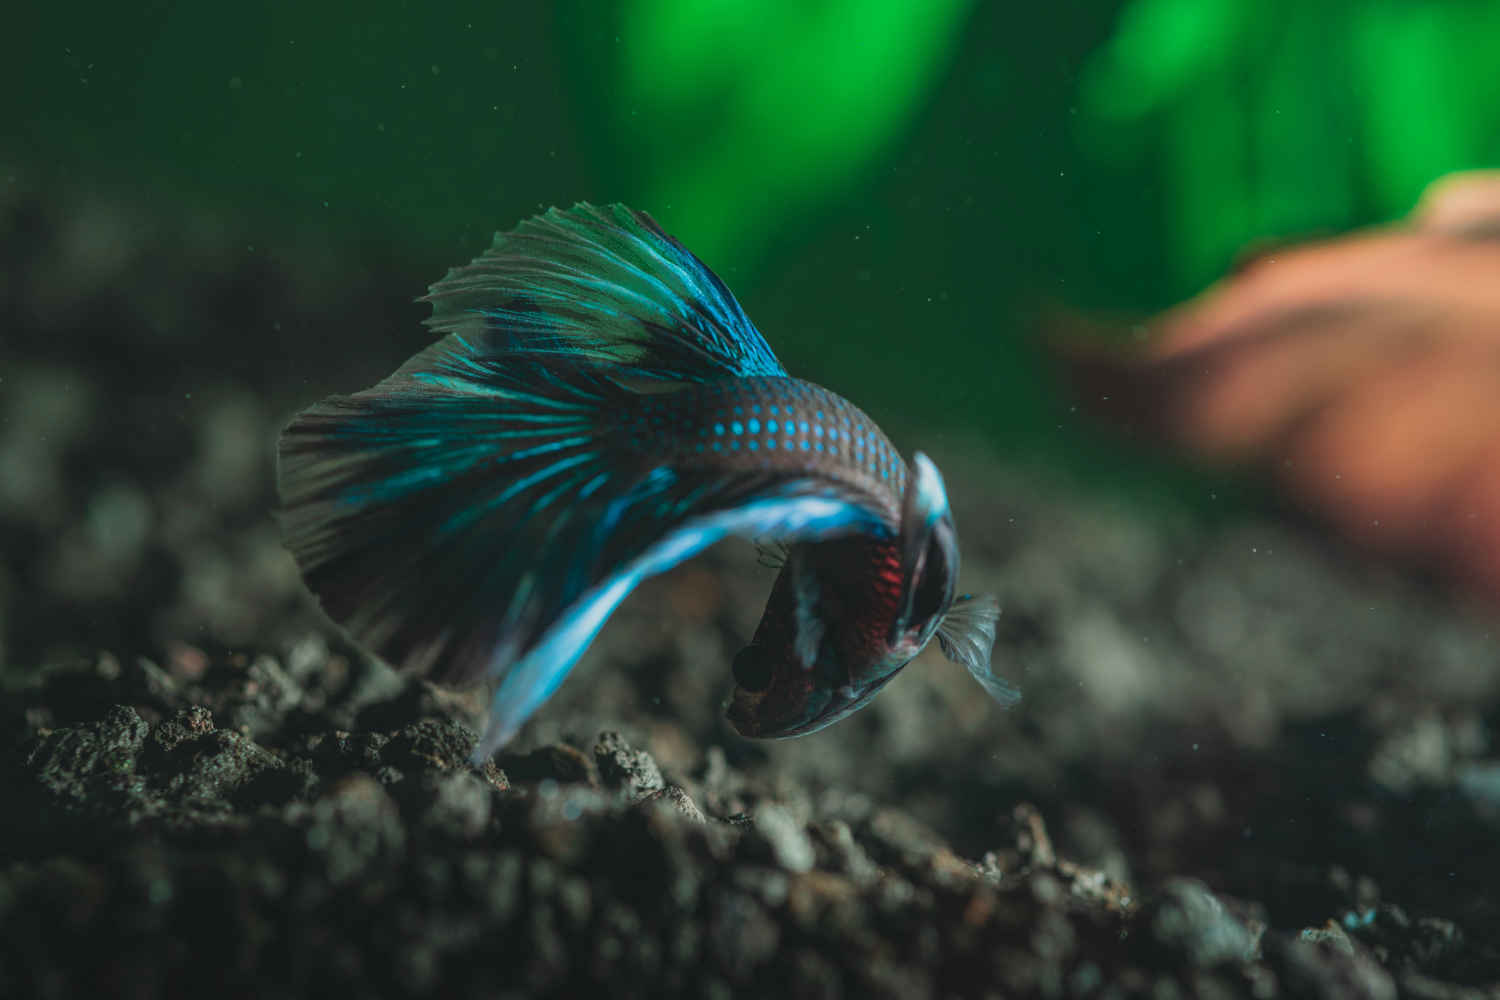 How do you prevent fish from getting stressed during water changes?